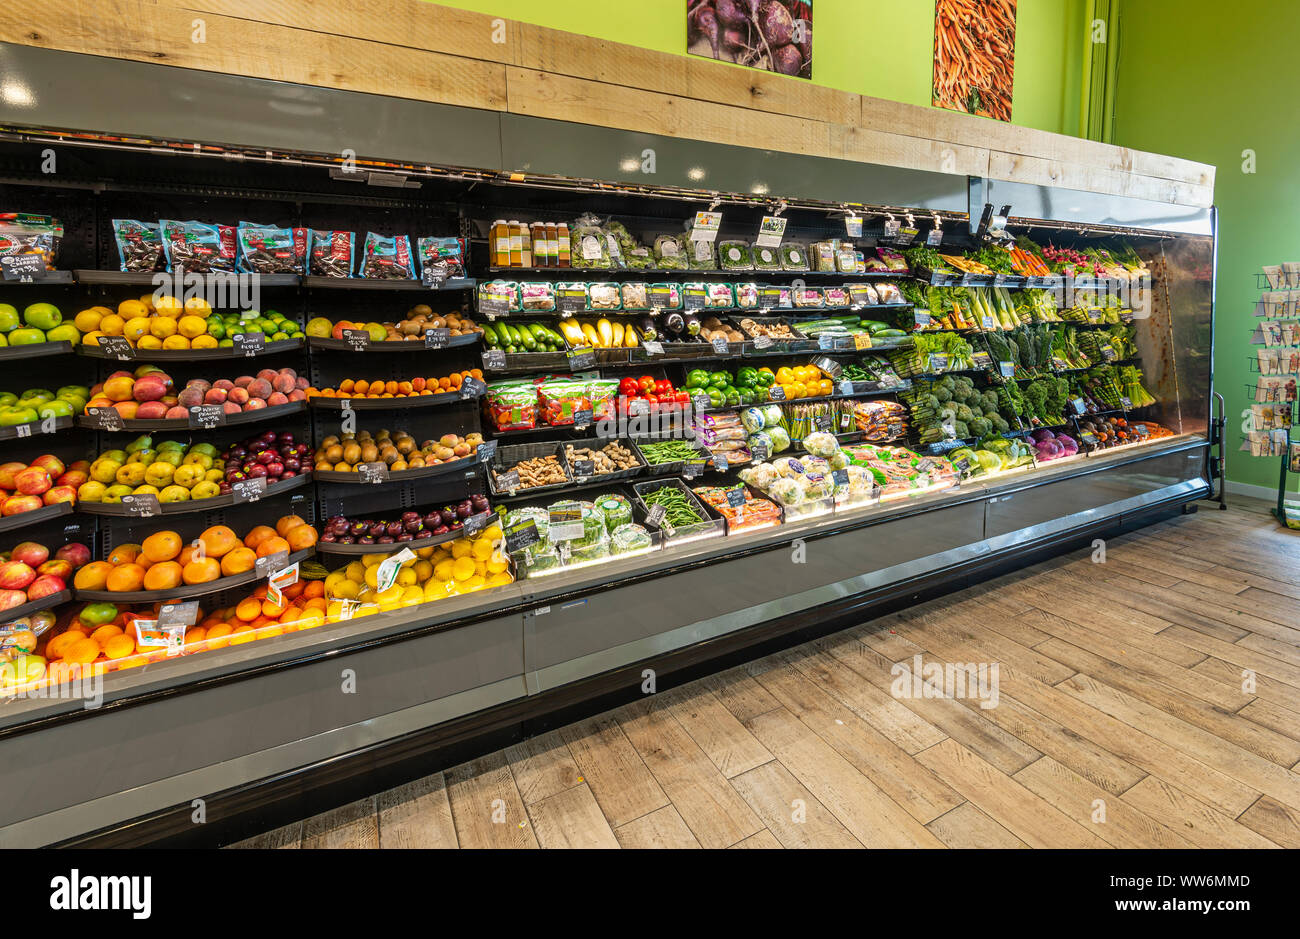 Fresh Produce Aisle Of American Grocery Store Stock Photo